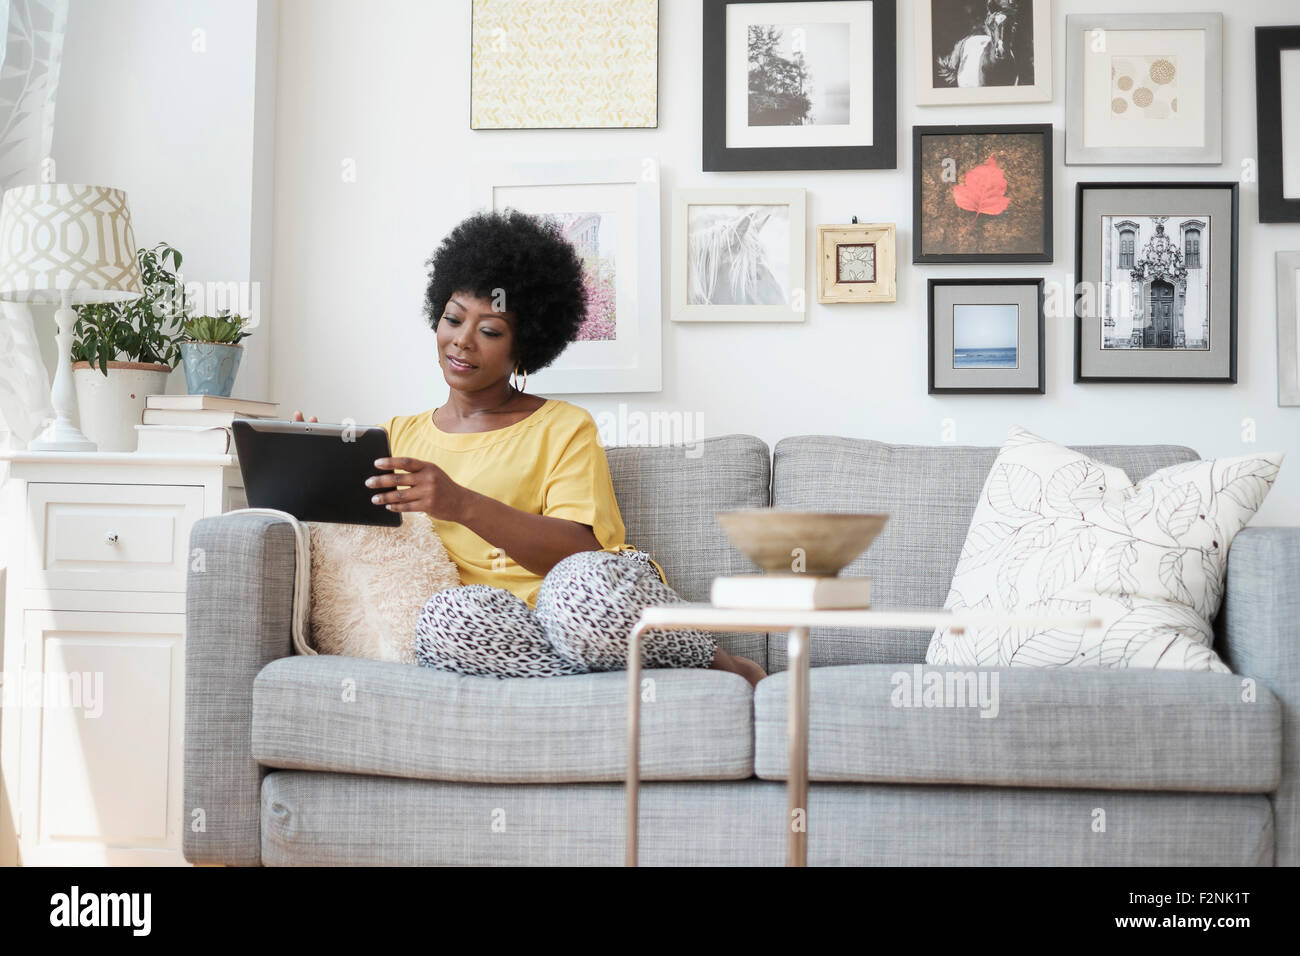 African American Woman sitting on sofa Banque D'Images